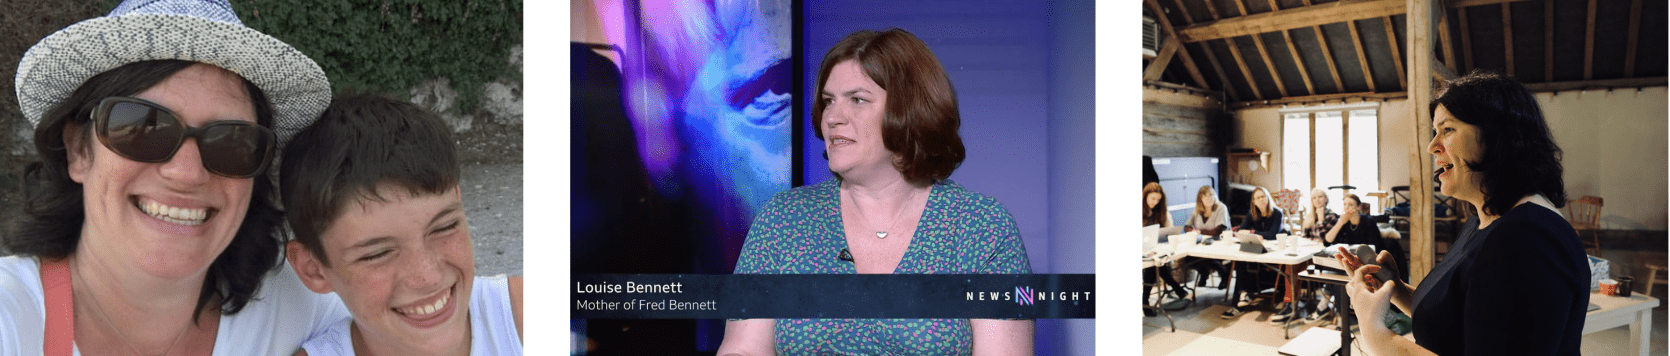 Louise Dillon newsnight<br />
